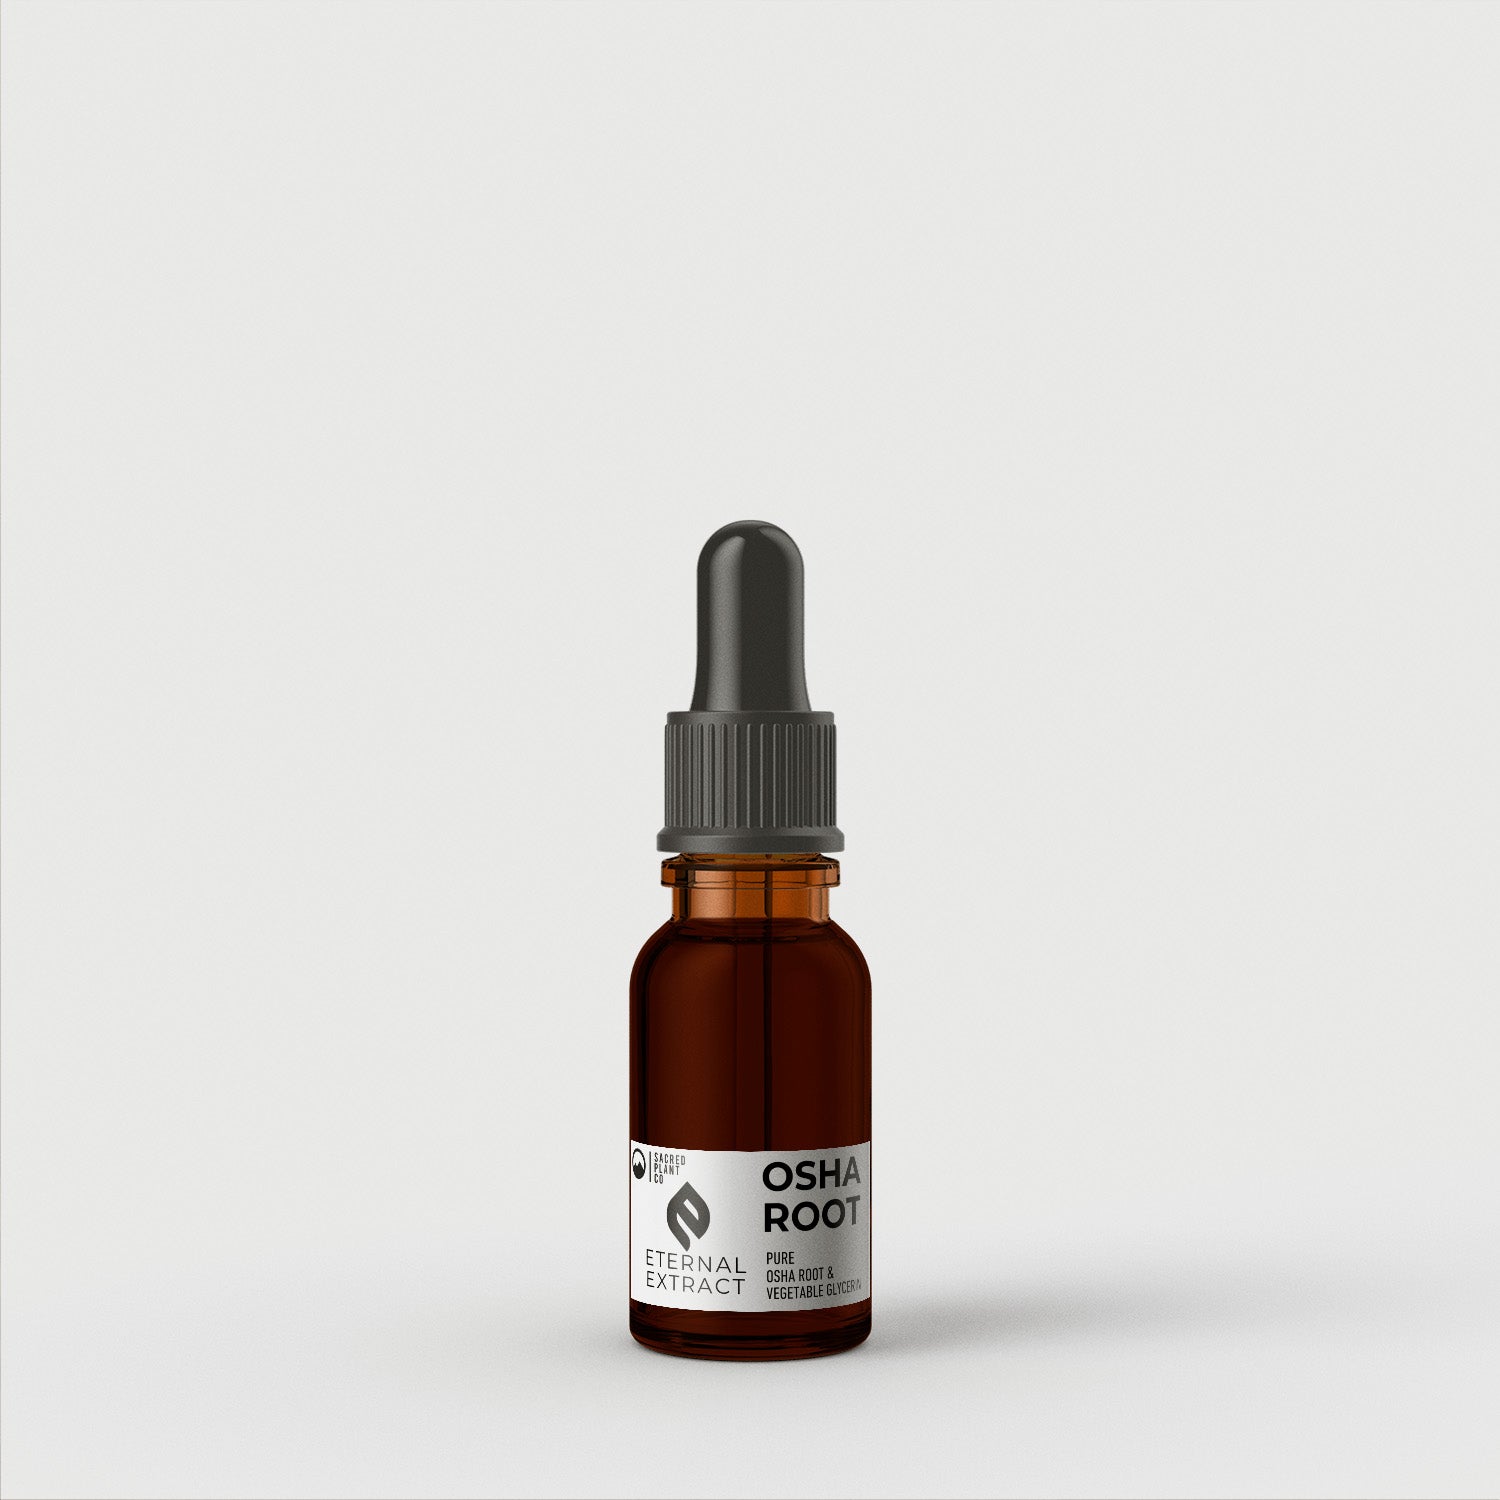 Small tincture bottle of Sacred Plant Co Osha Root Eternal Extract, concentrated respiratory wellness tincture.